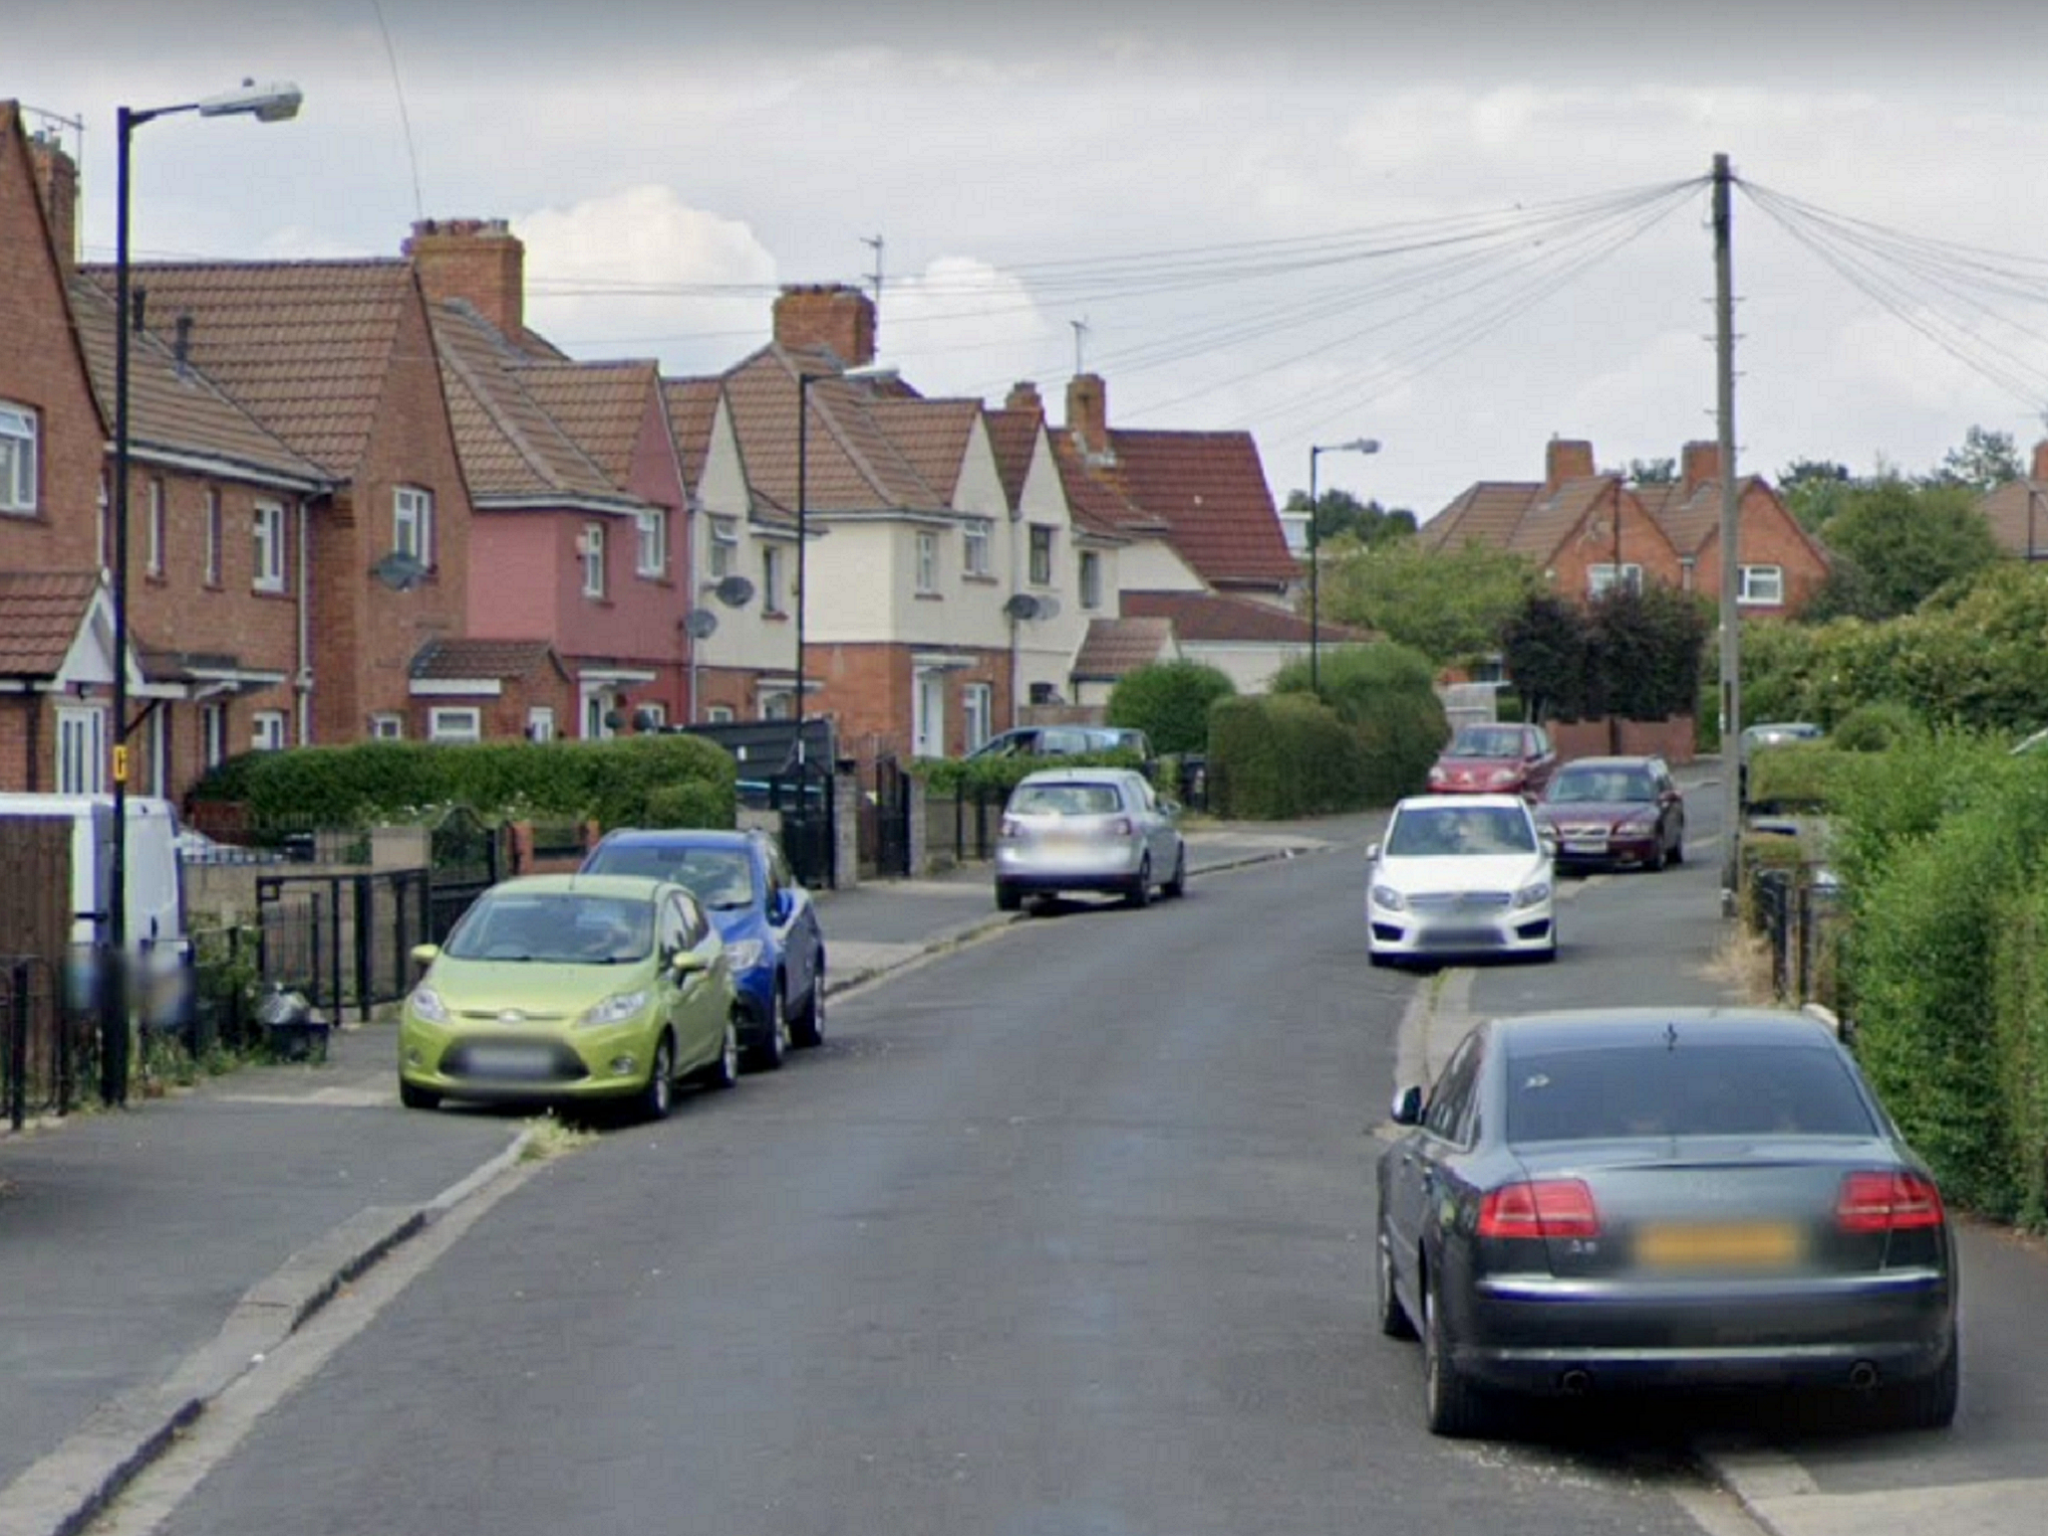 General view of Ringwood Crescent in Southmead, Bristol, where a man and woman were found with shotgun wounds, 18 June 2020.